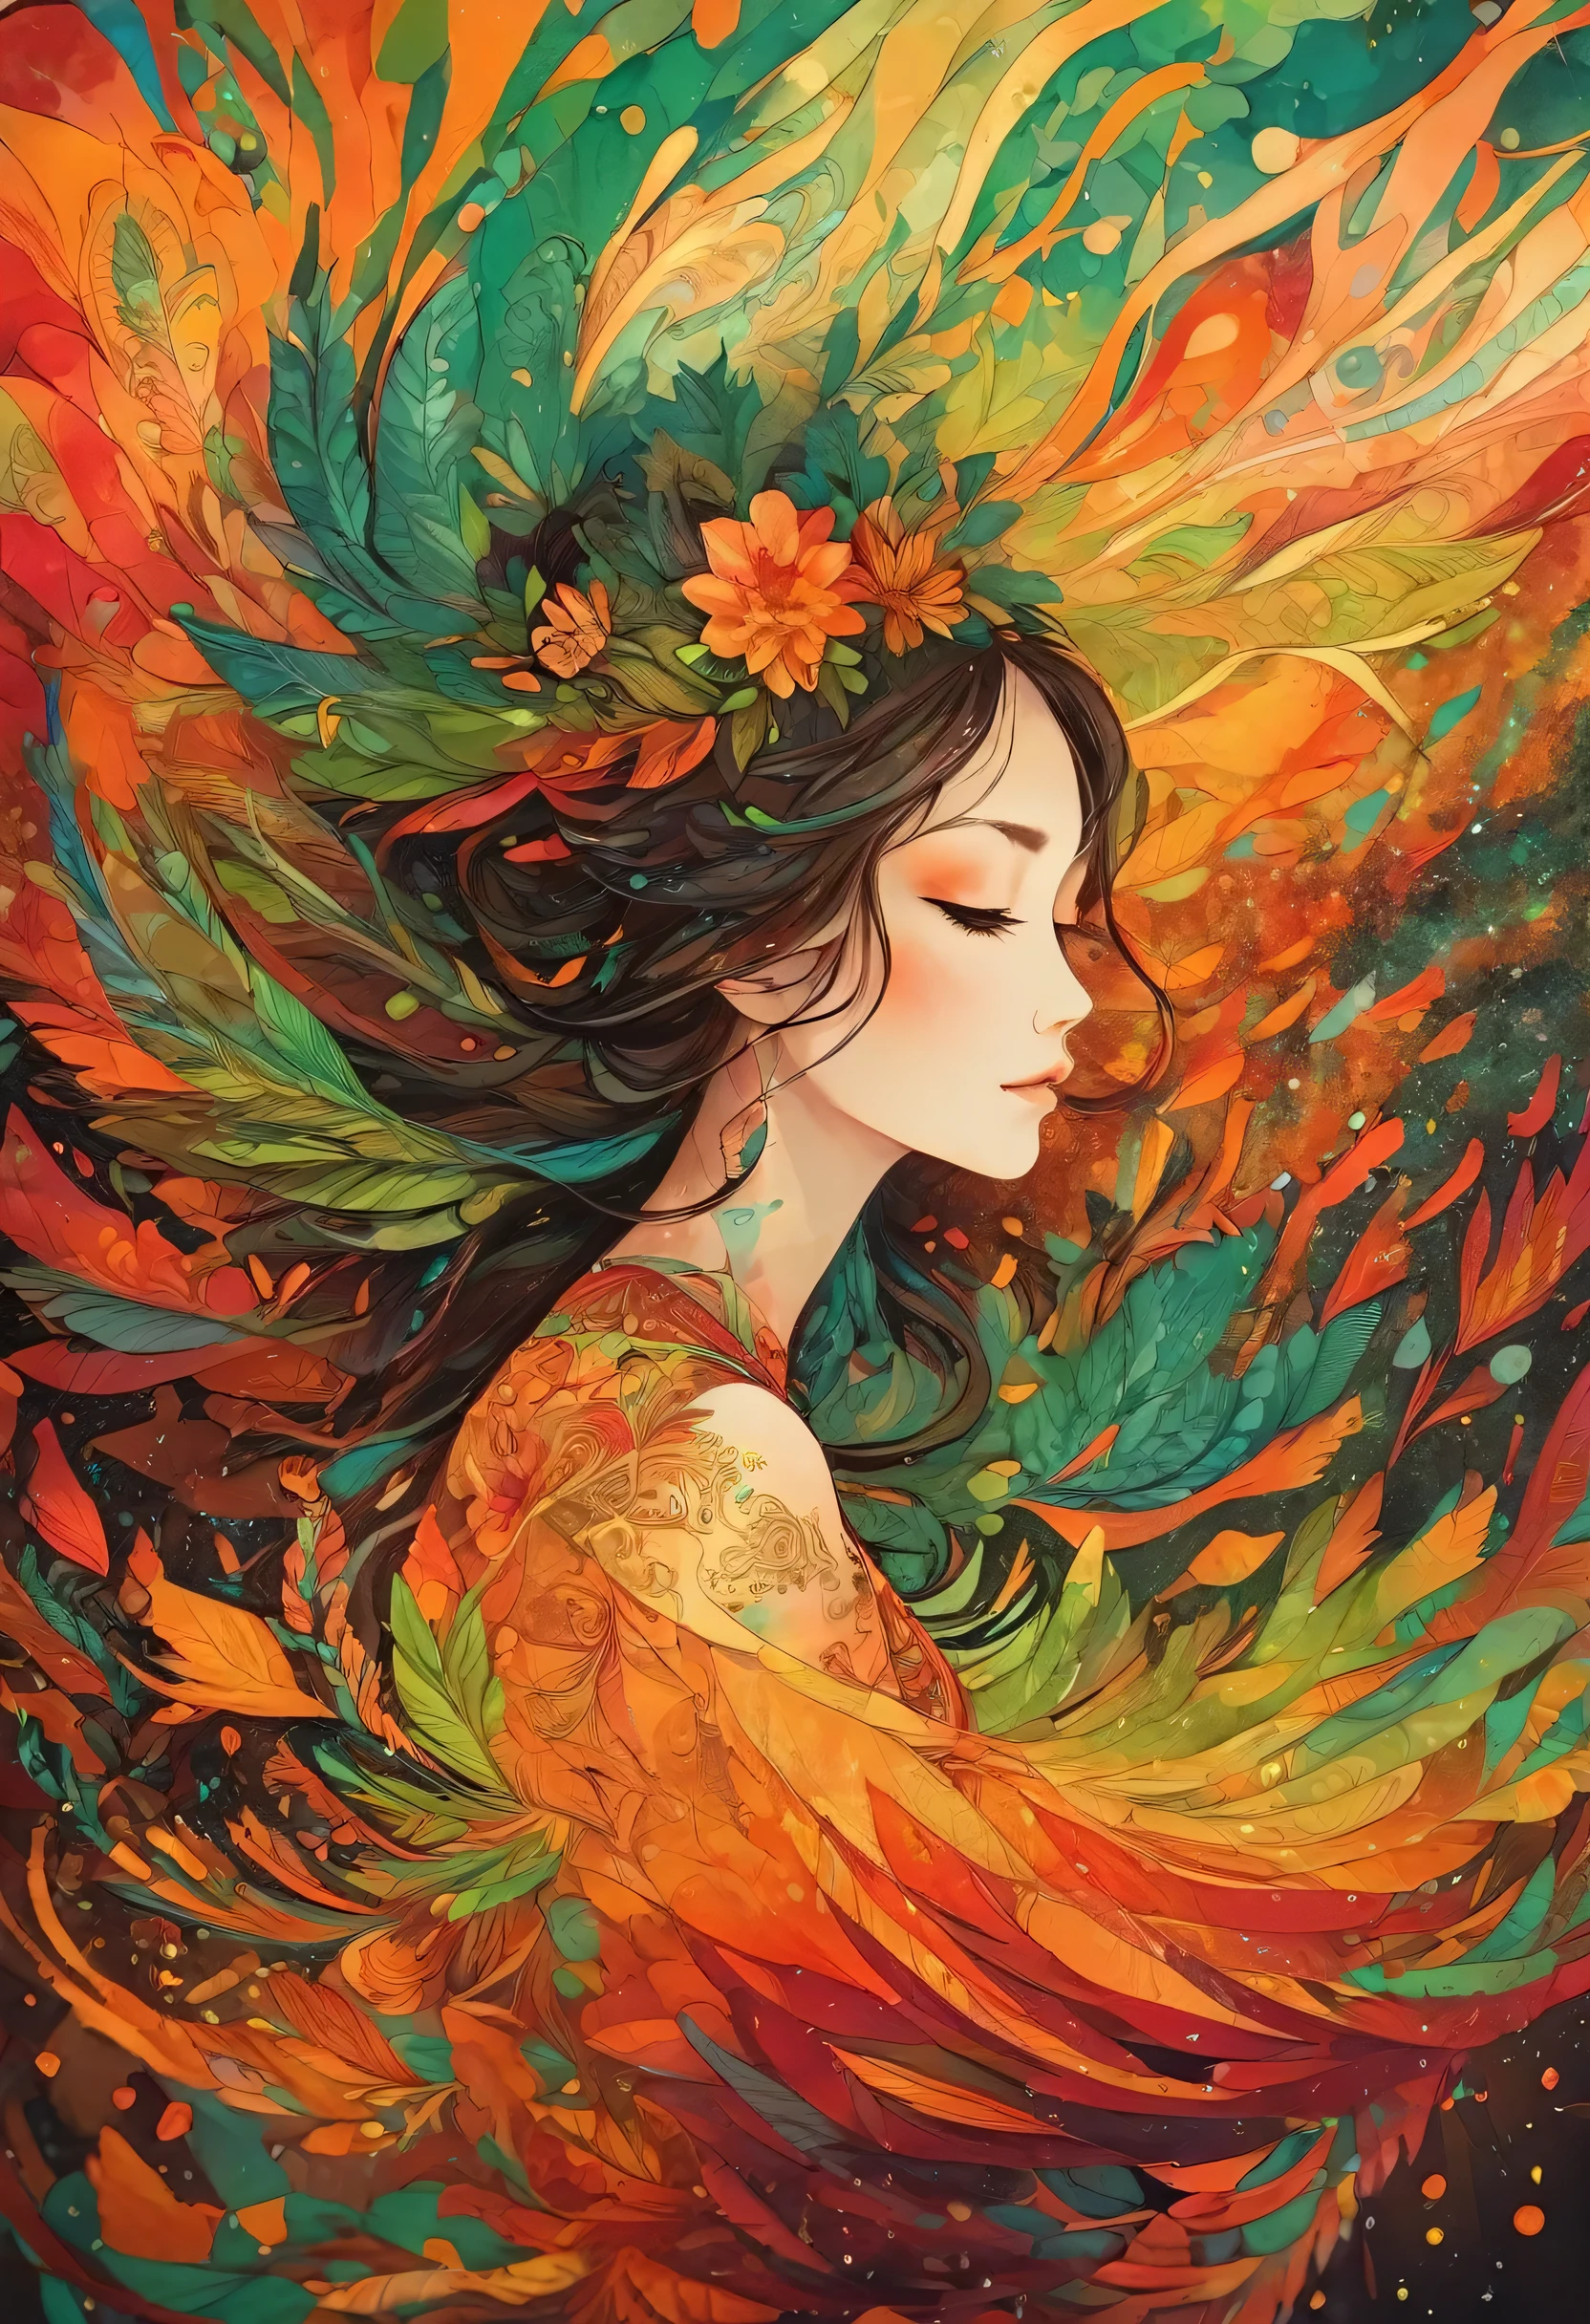 (highest quality,High resolution:1.2),Rain Spirit、Beautiful female spirit、Colorful background,Orange、red、green、Blurred,Zentangle Style,Fractal Style、black,Brown, Smash it, stand out, The most inspiring silhouette ever, Shine, Light explosion, Flying Bird, magic, thank you. By Tupu...lol...